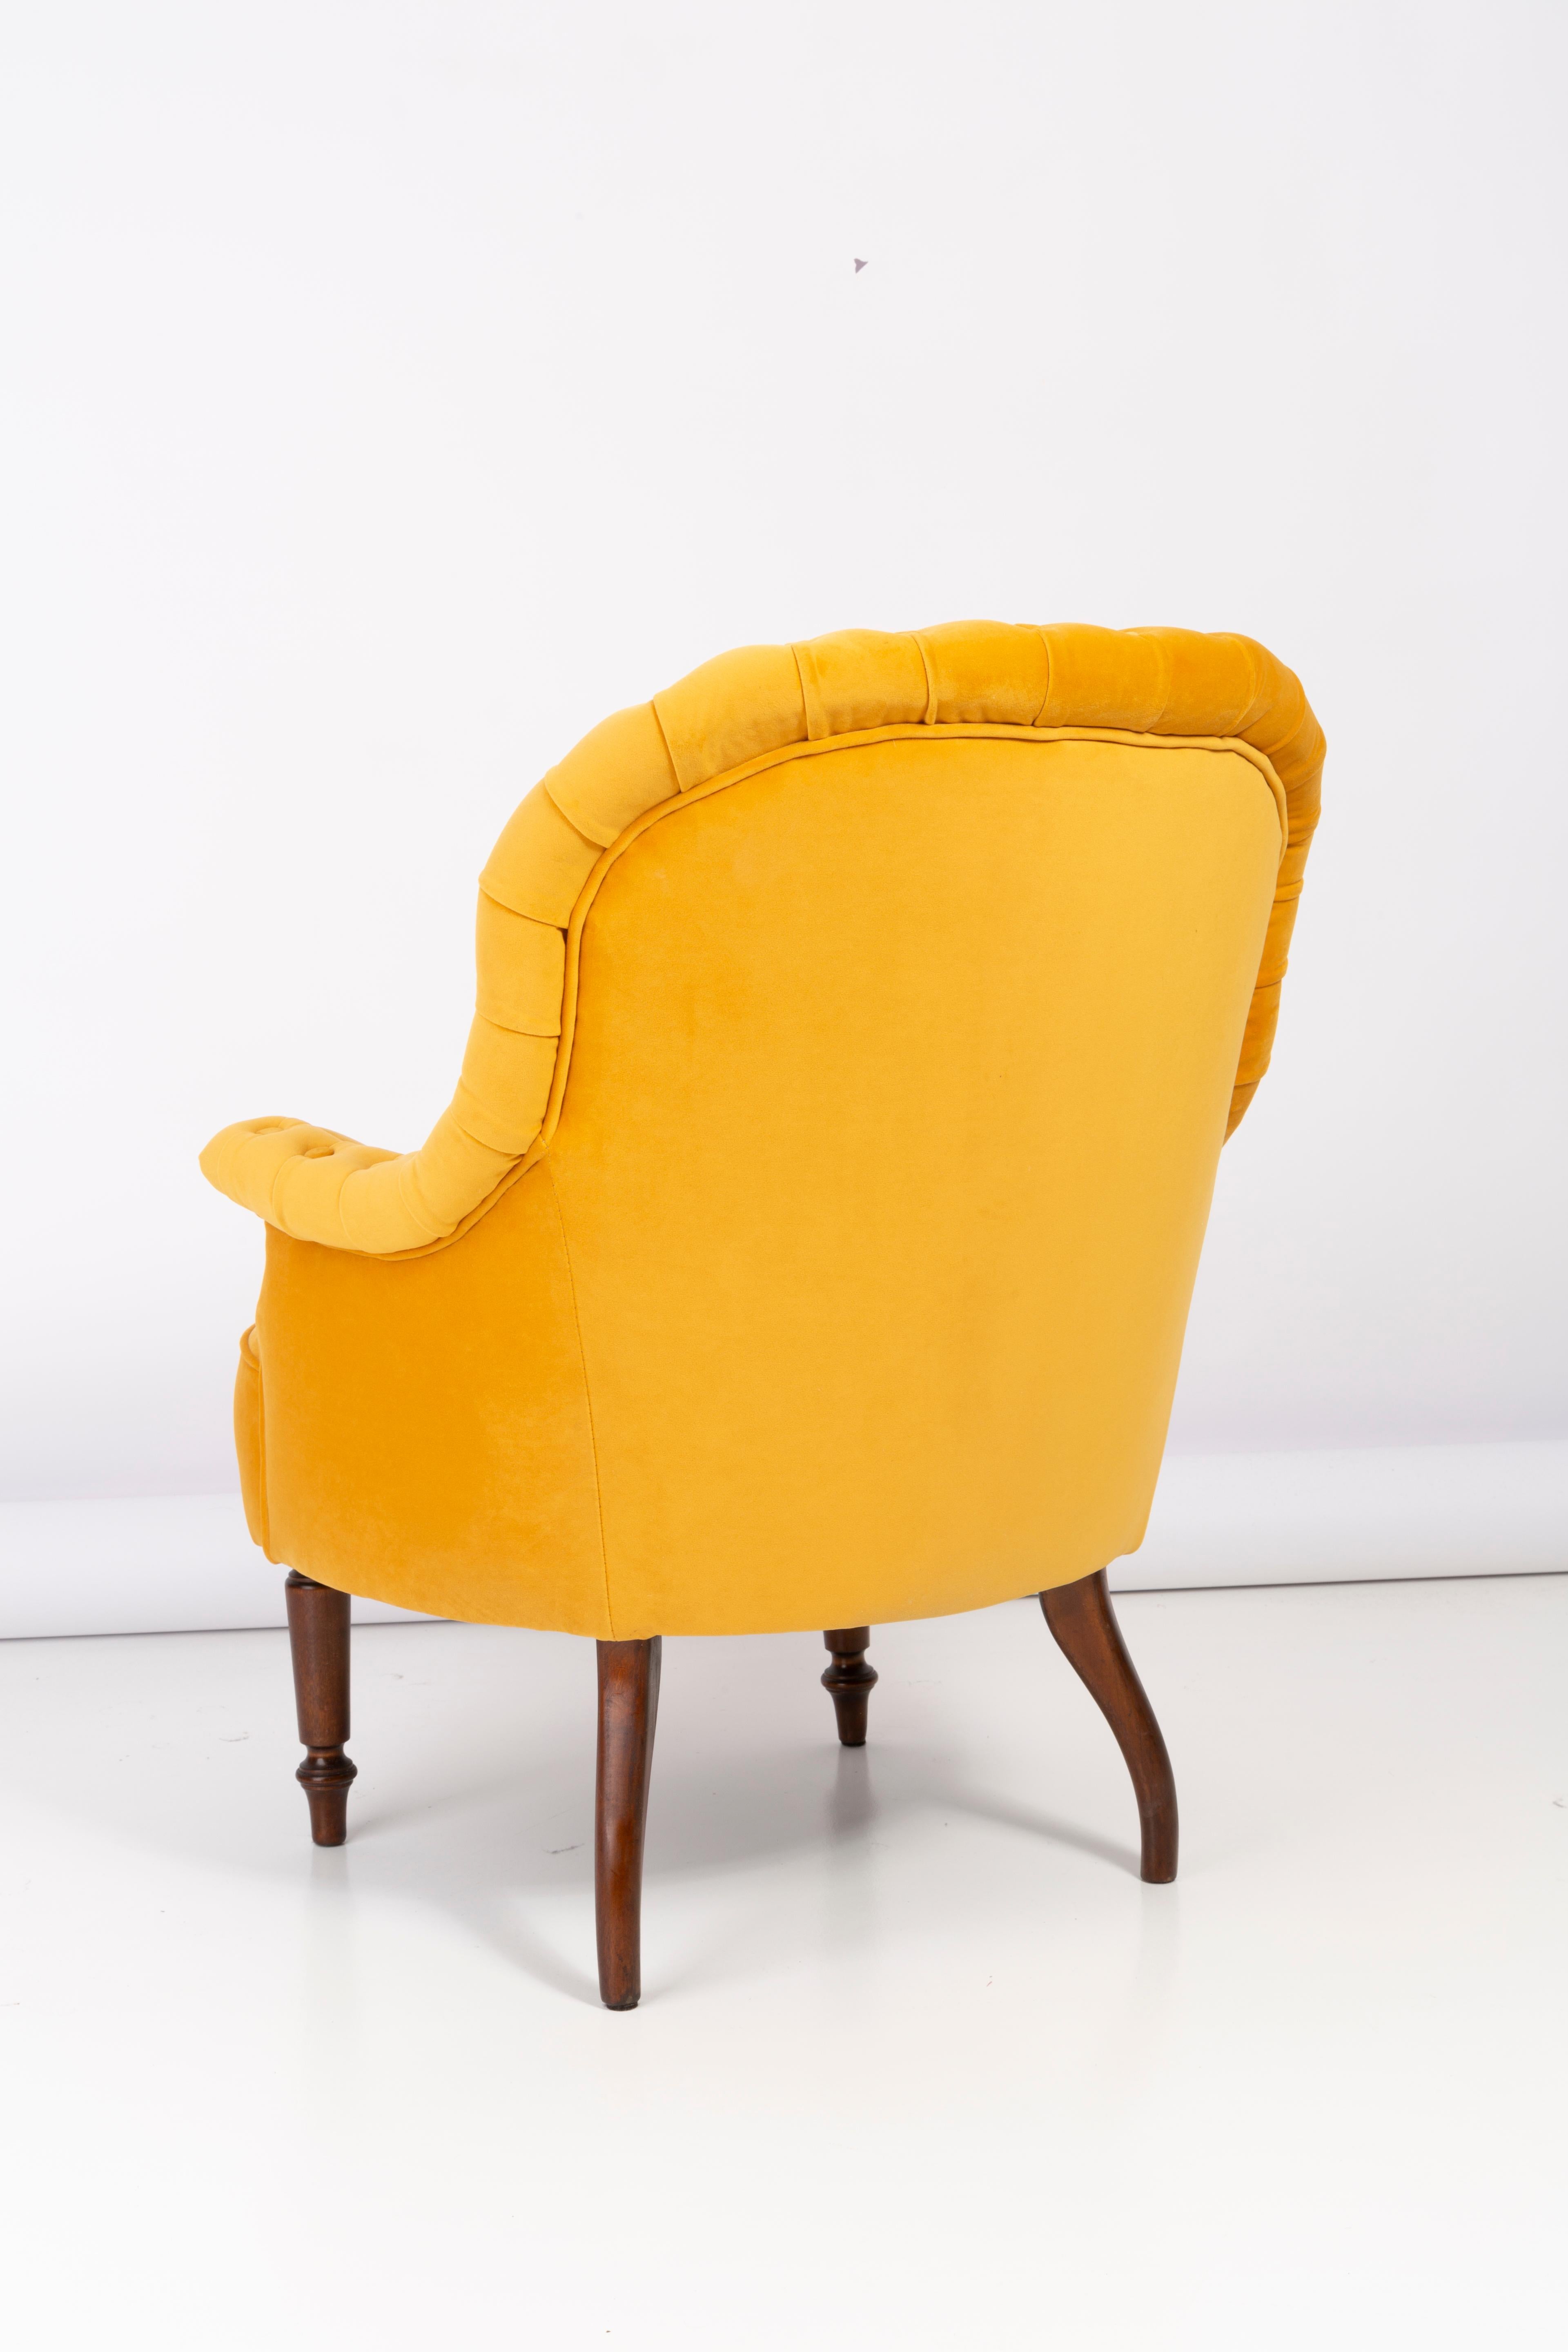 Unique Yellow Mustard Armchair, 1930s, Germany For Sale 2